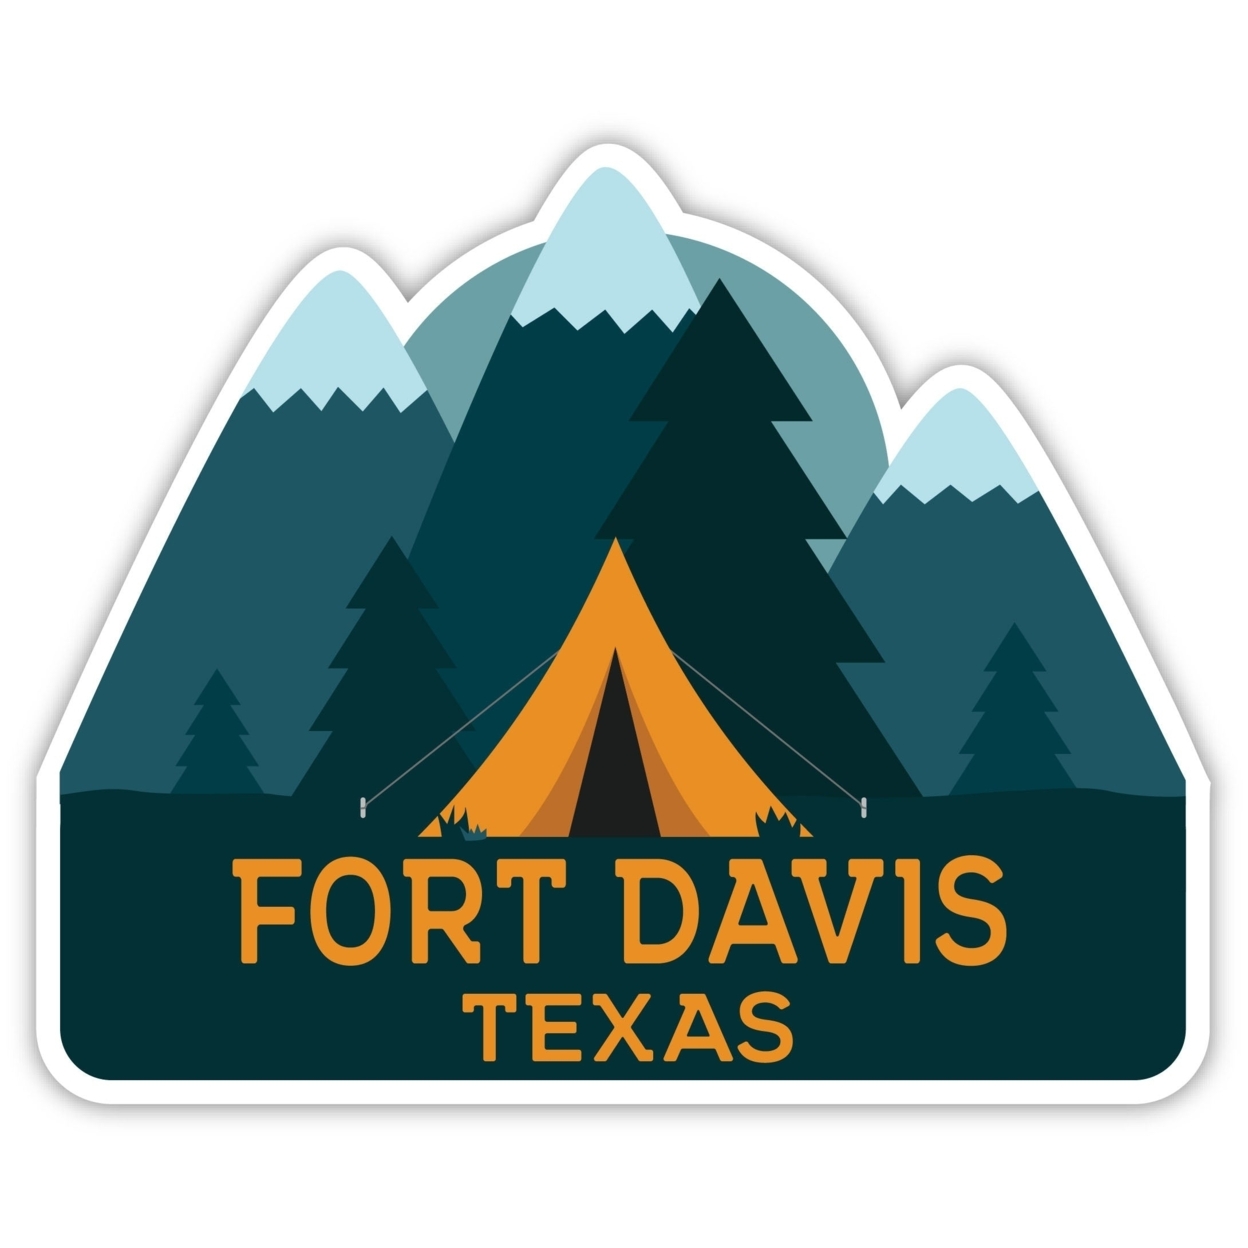 Fort Davis Texas Souvenir Decorative Stickers (Choose Theme And Size) - 4-Pack, 2-Inch, Tent